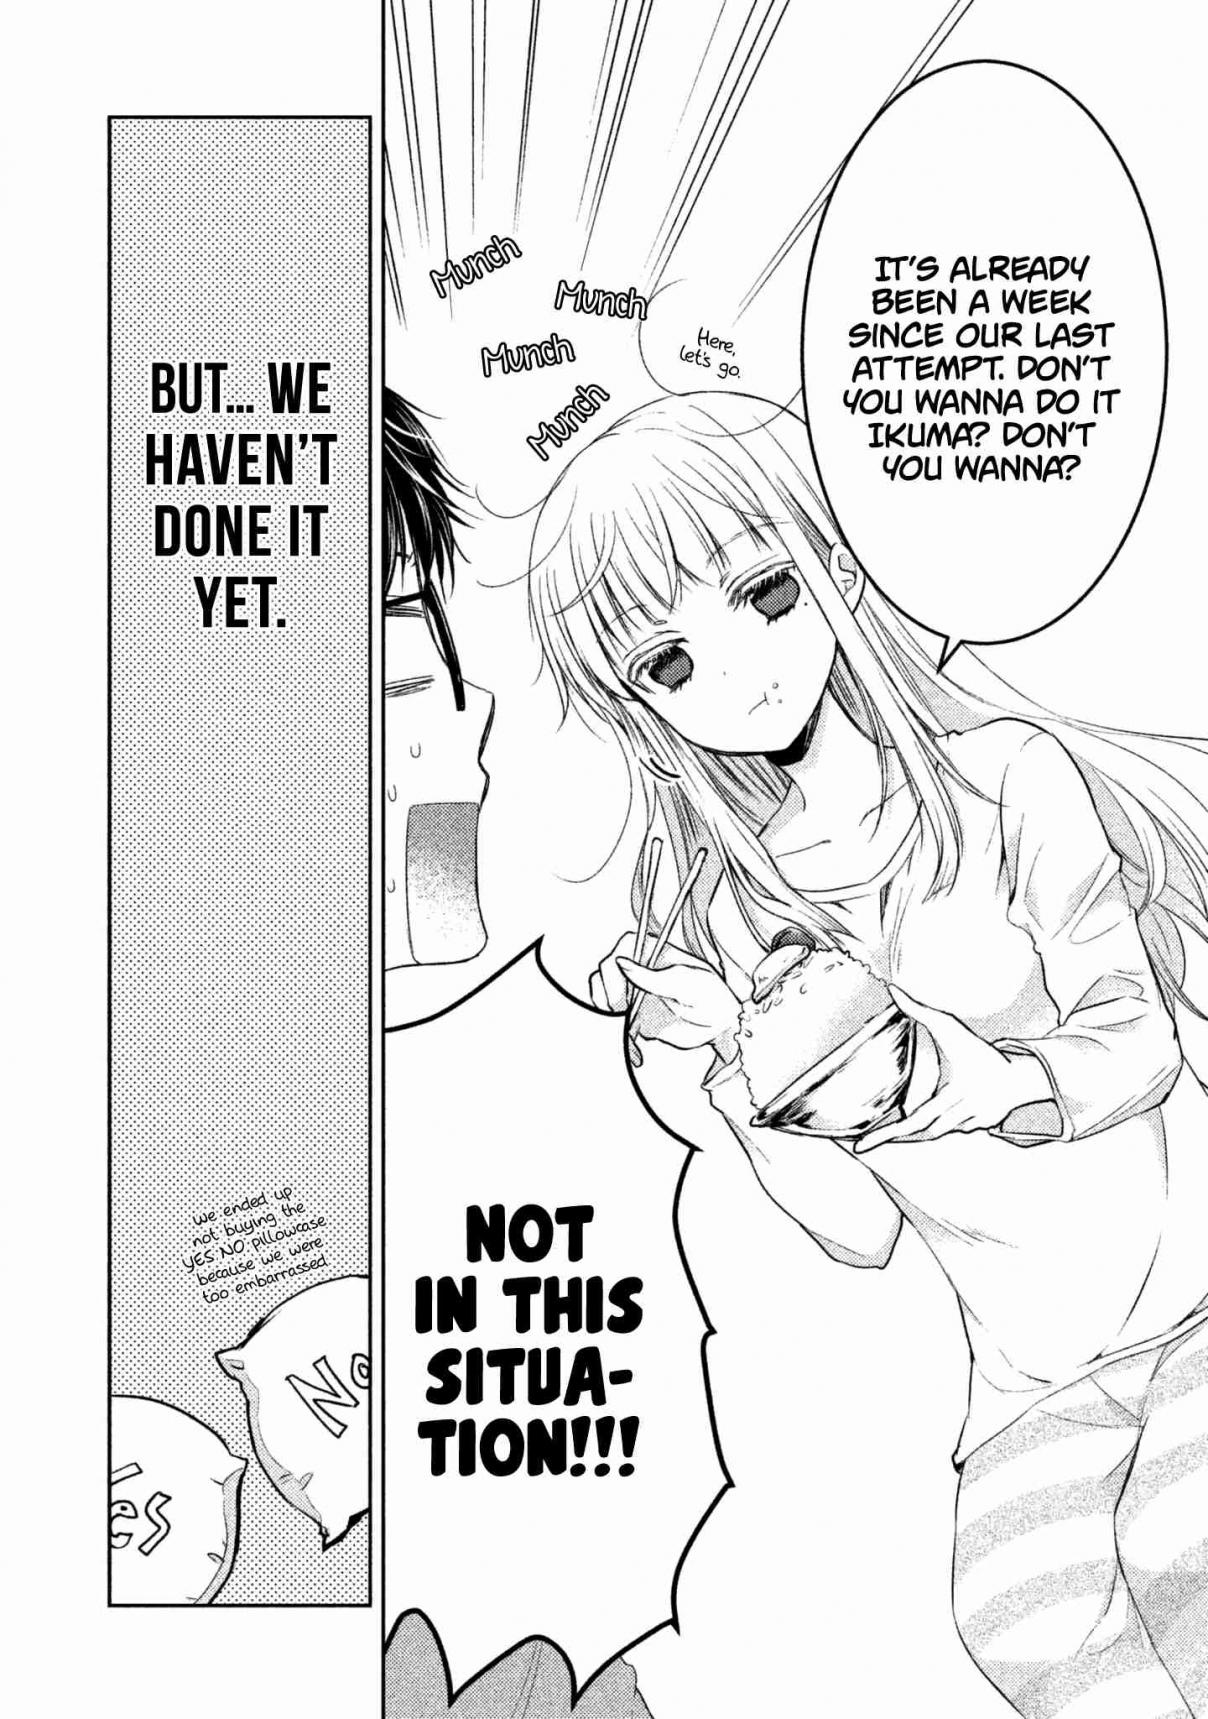 We May Be An Inexperienced Couple But... Vol. 1 Ch. 2 How To Ask a New Bride